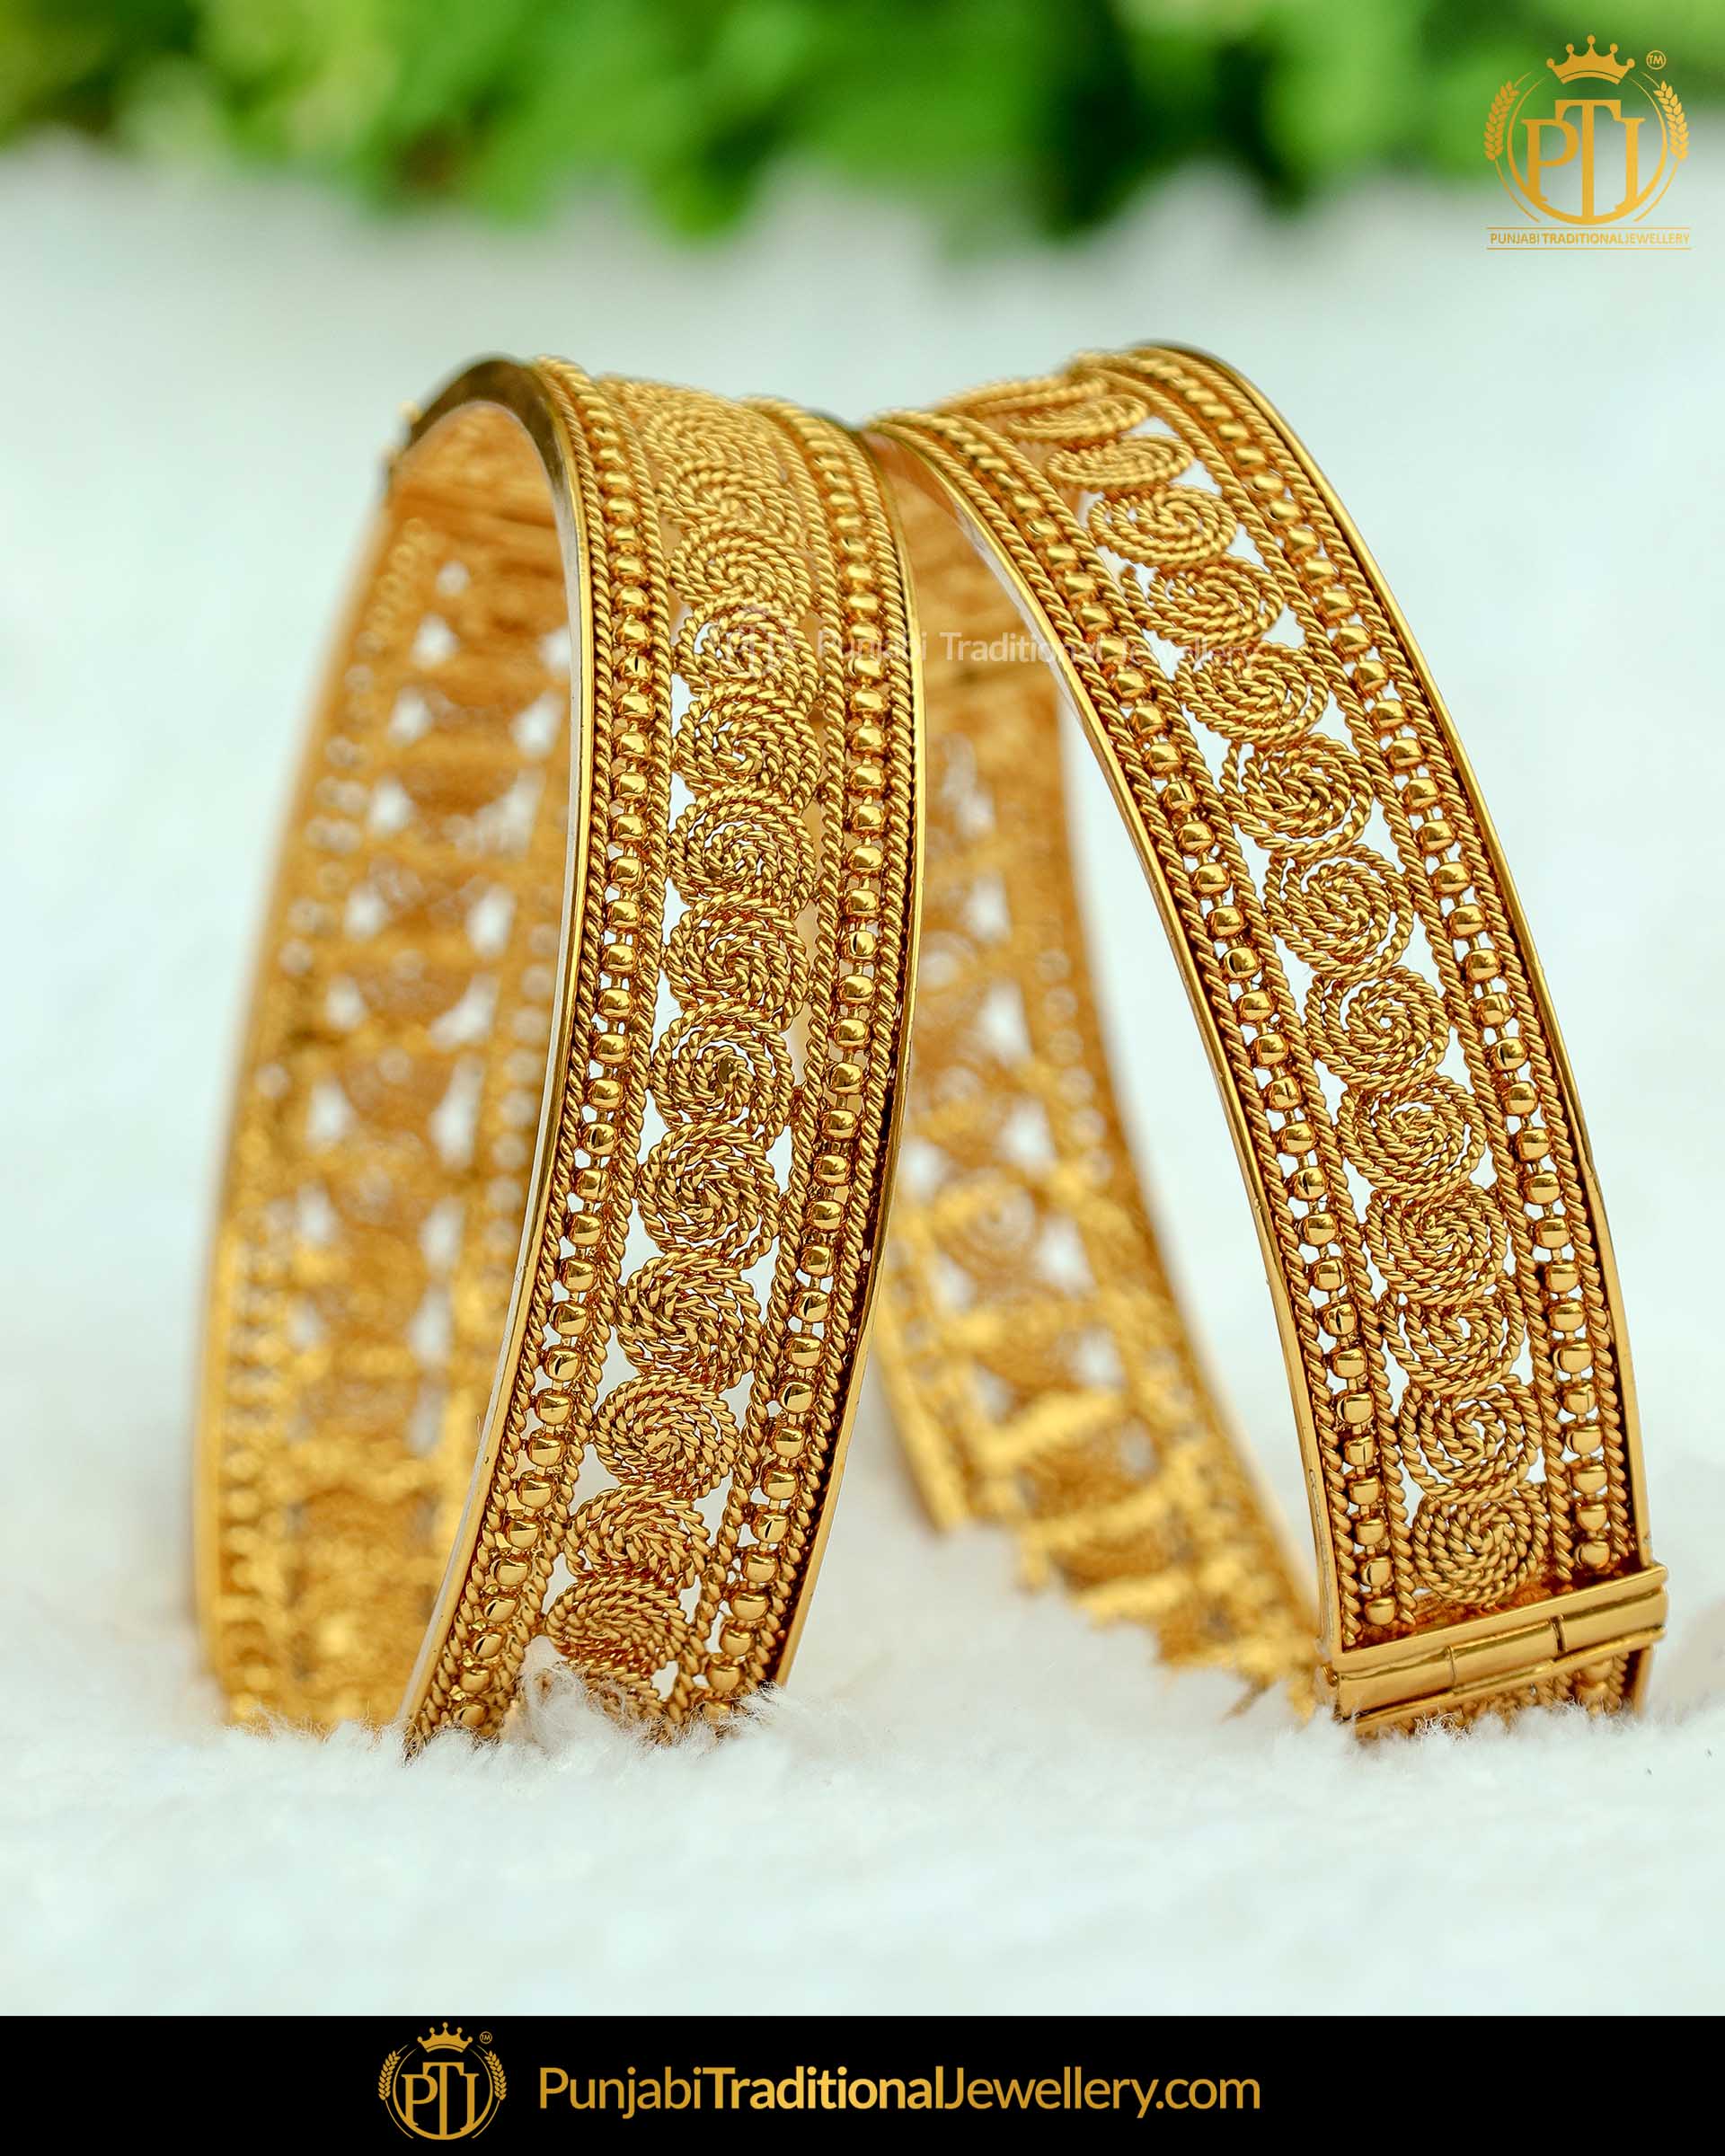 Amazon.com: Ethlyn 18K Gold Plated Beads Bangles Bracelets Party  Accessories for Women Girls Gifts (C): Clothing, Shoes & Jewelry